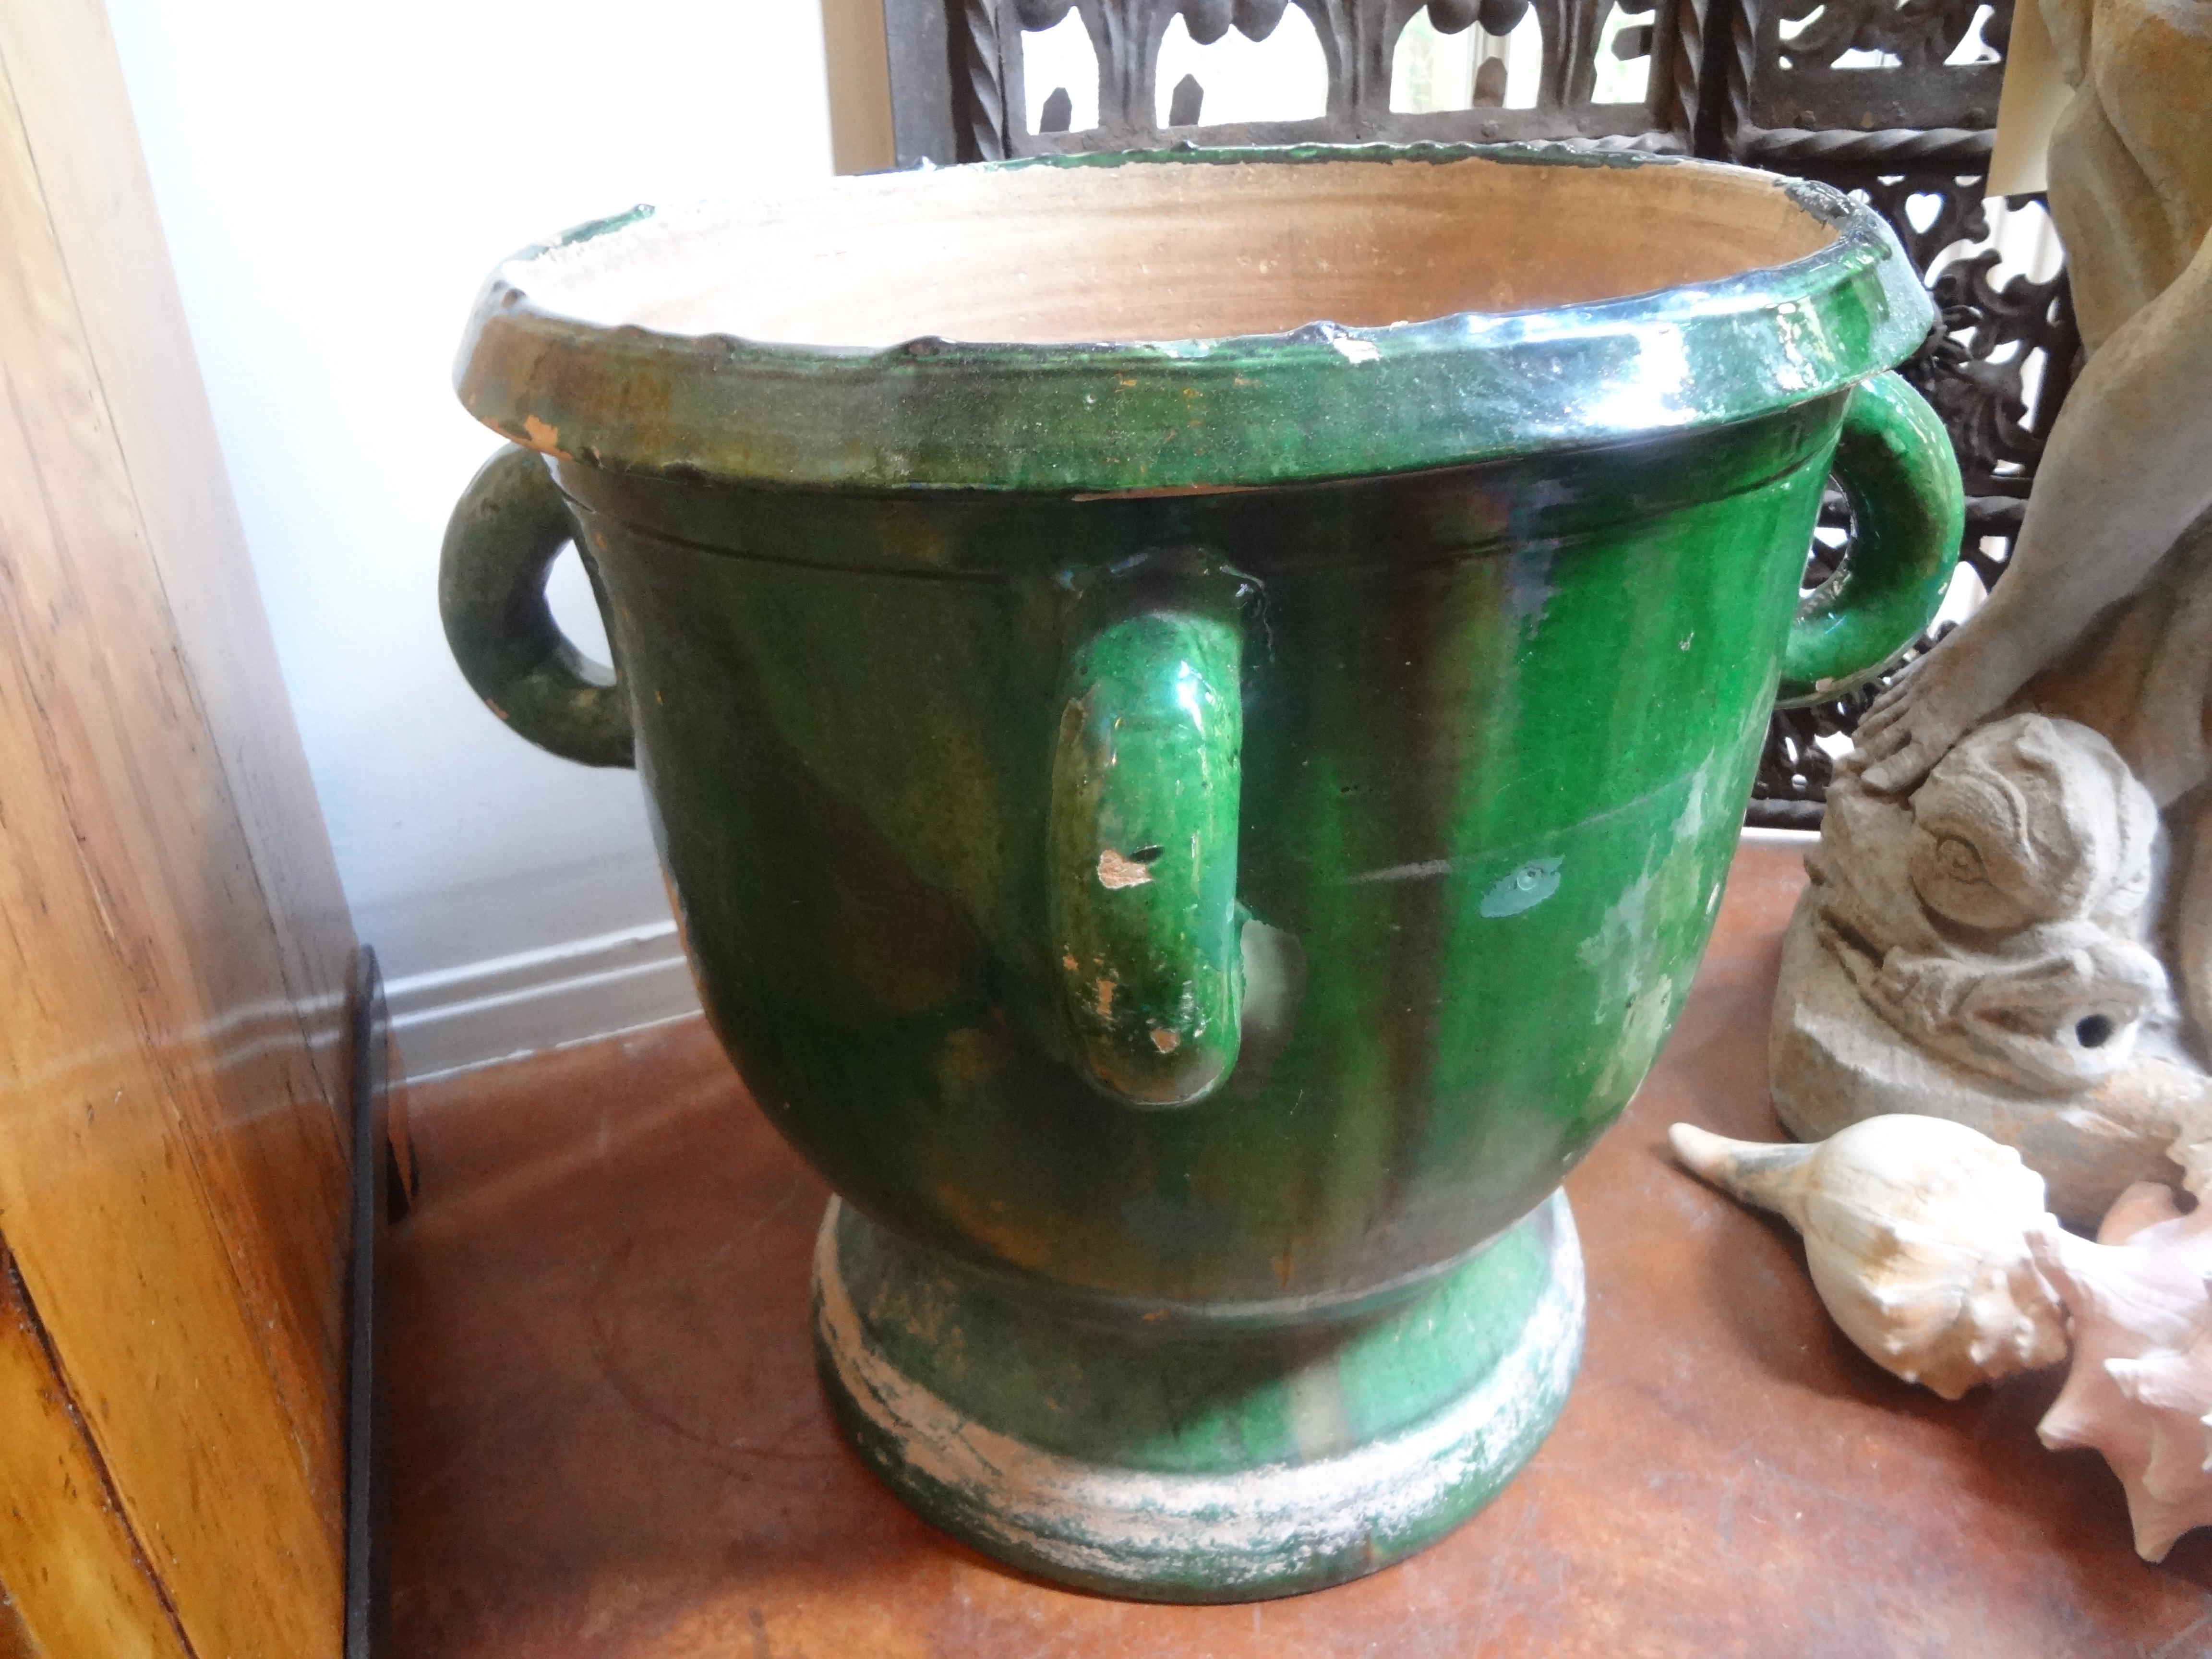 19th century green glazed planter or jardinière from Anduze, France with four handles and a footed base. This glazed earthenware planter from Provence has a beautiful green glaze that is worn in places but overall has a great patina. Dimensions